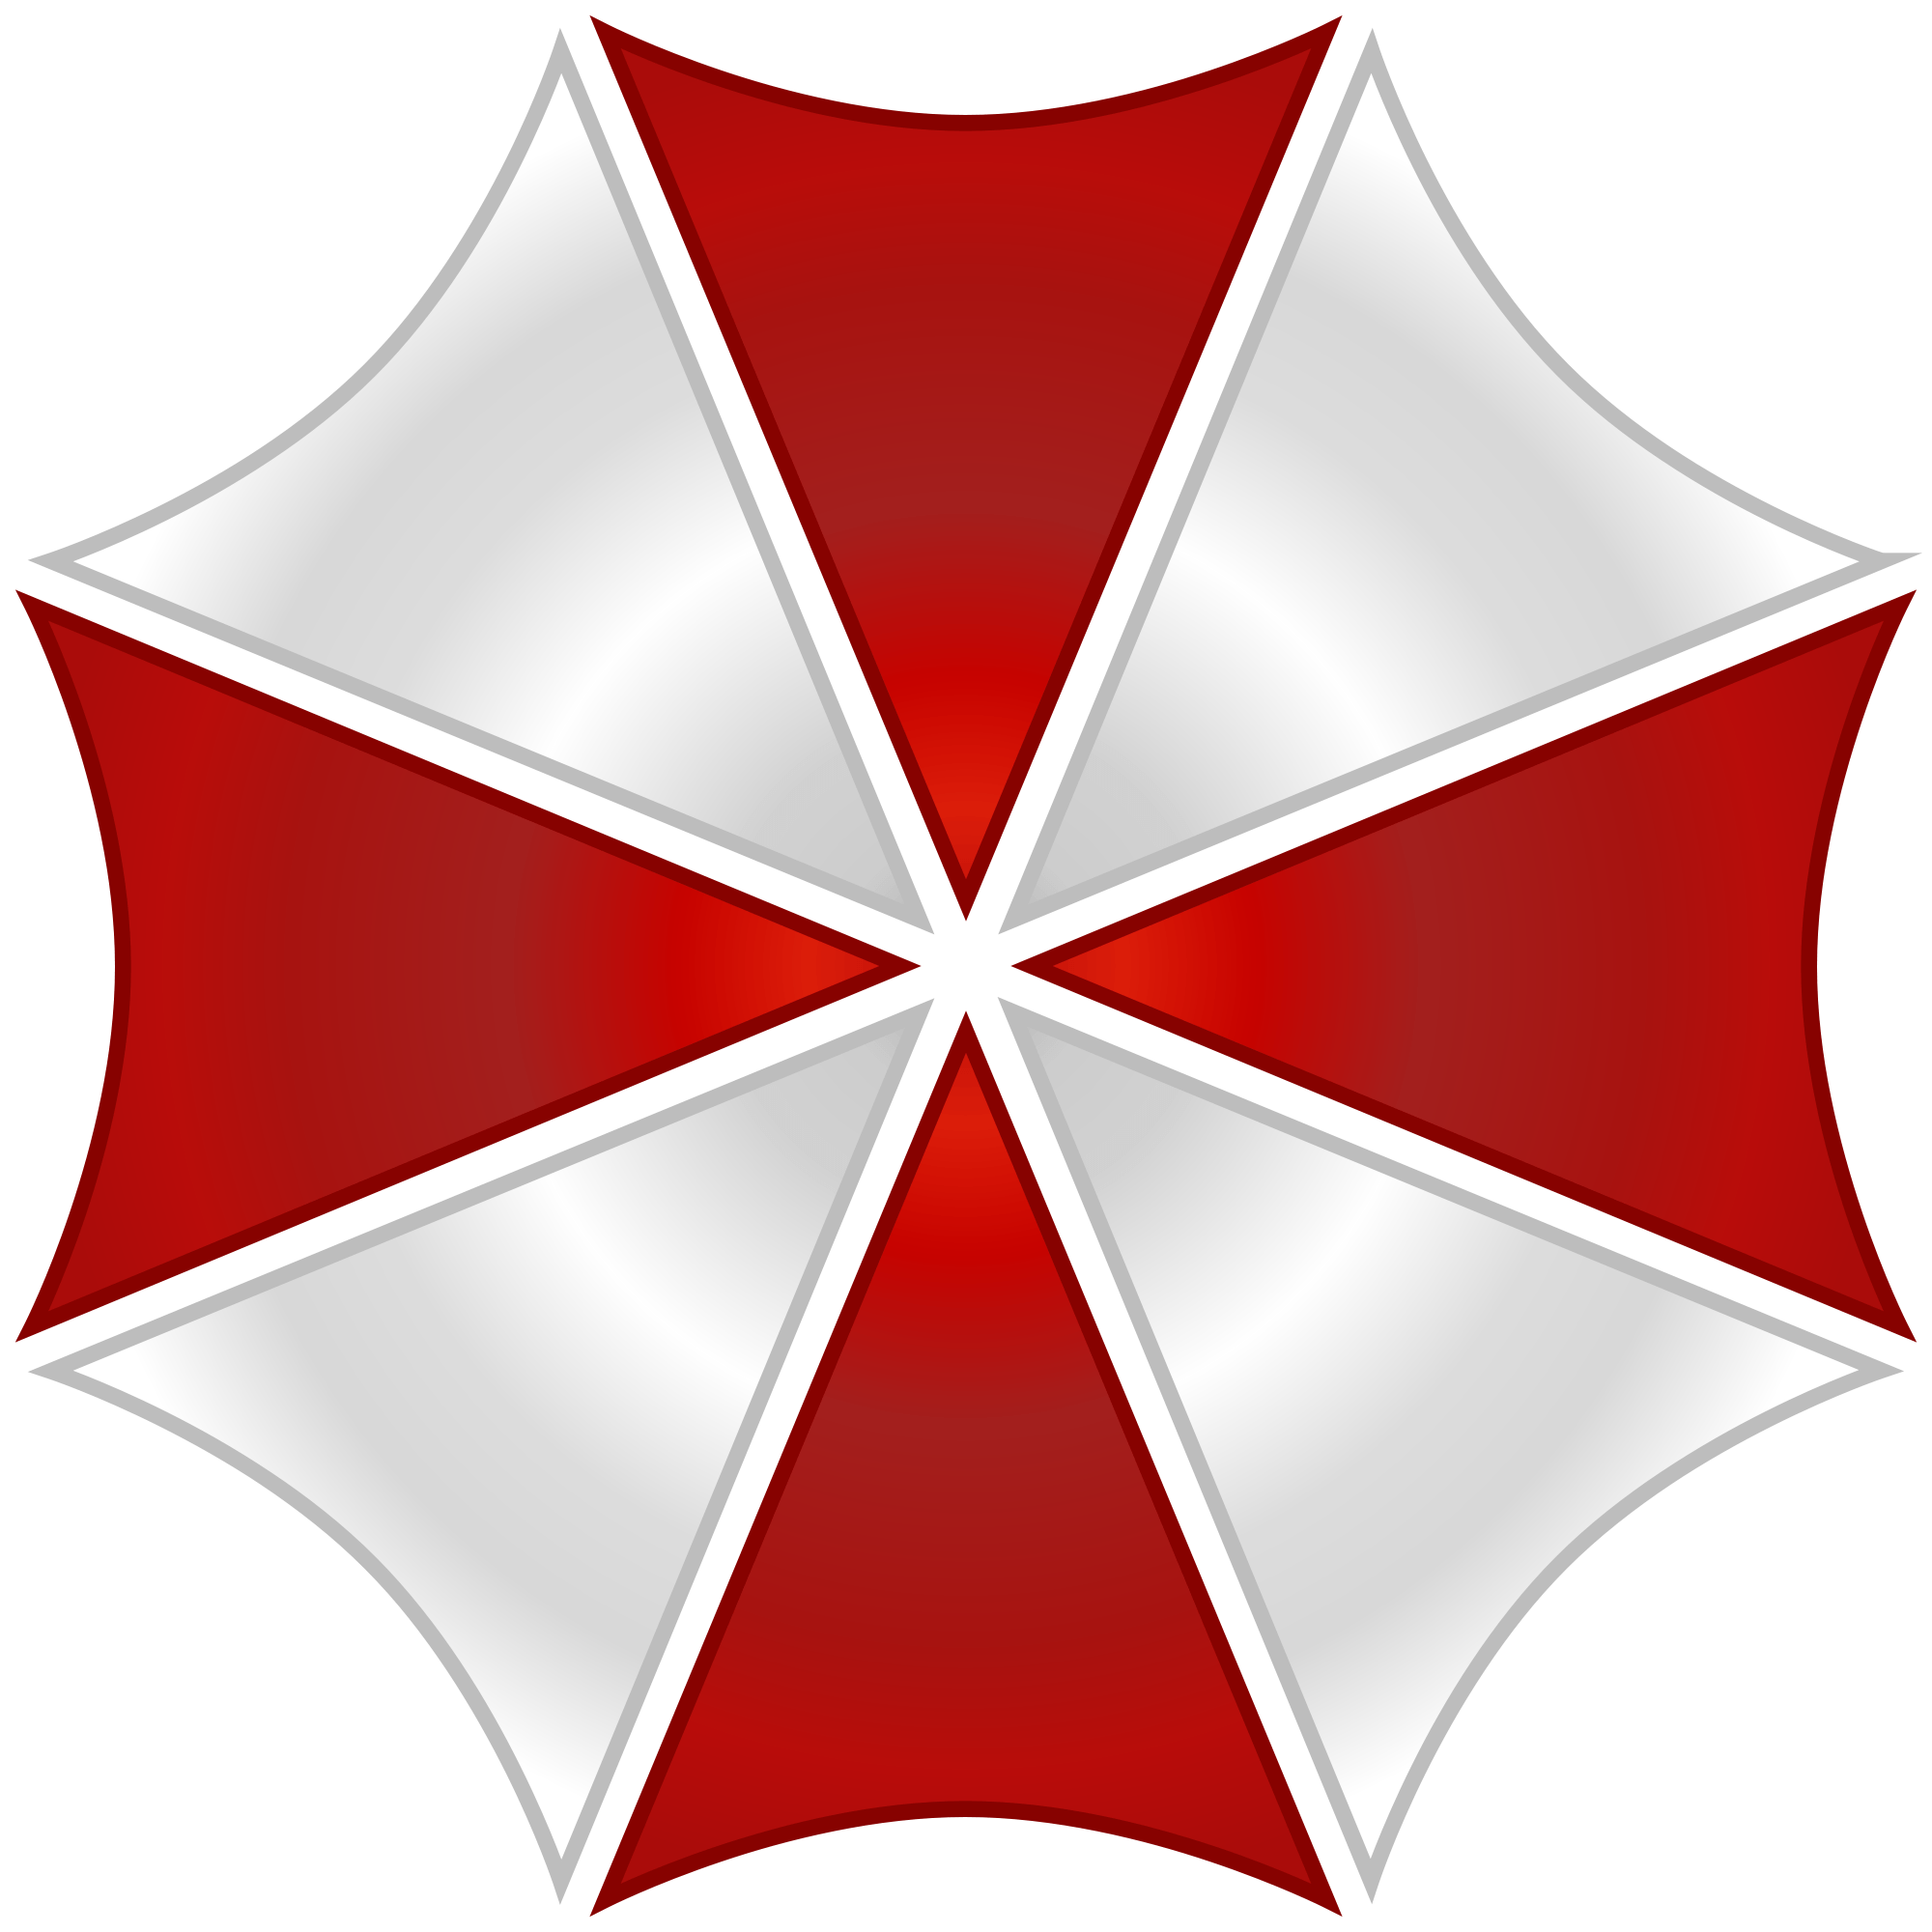 Free Download Umbrella Corporation Wallpaper By Pencilshadepng | Images